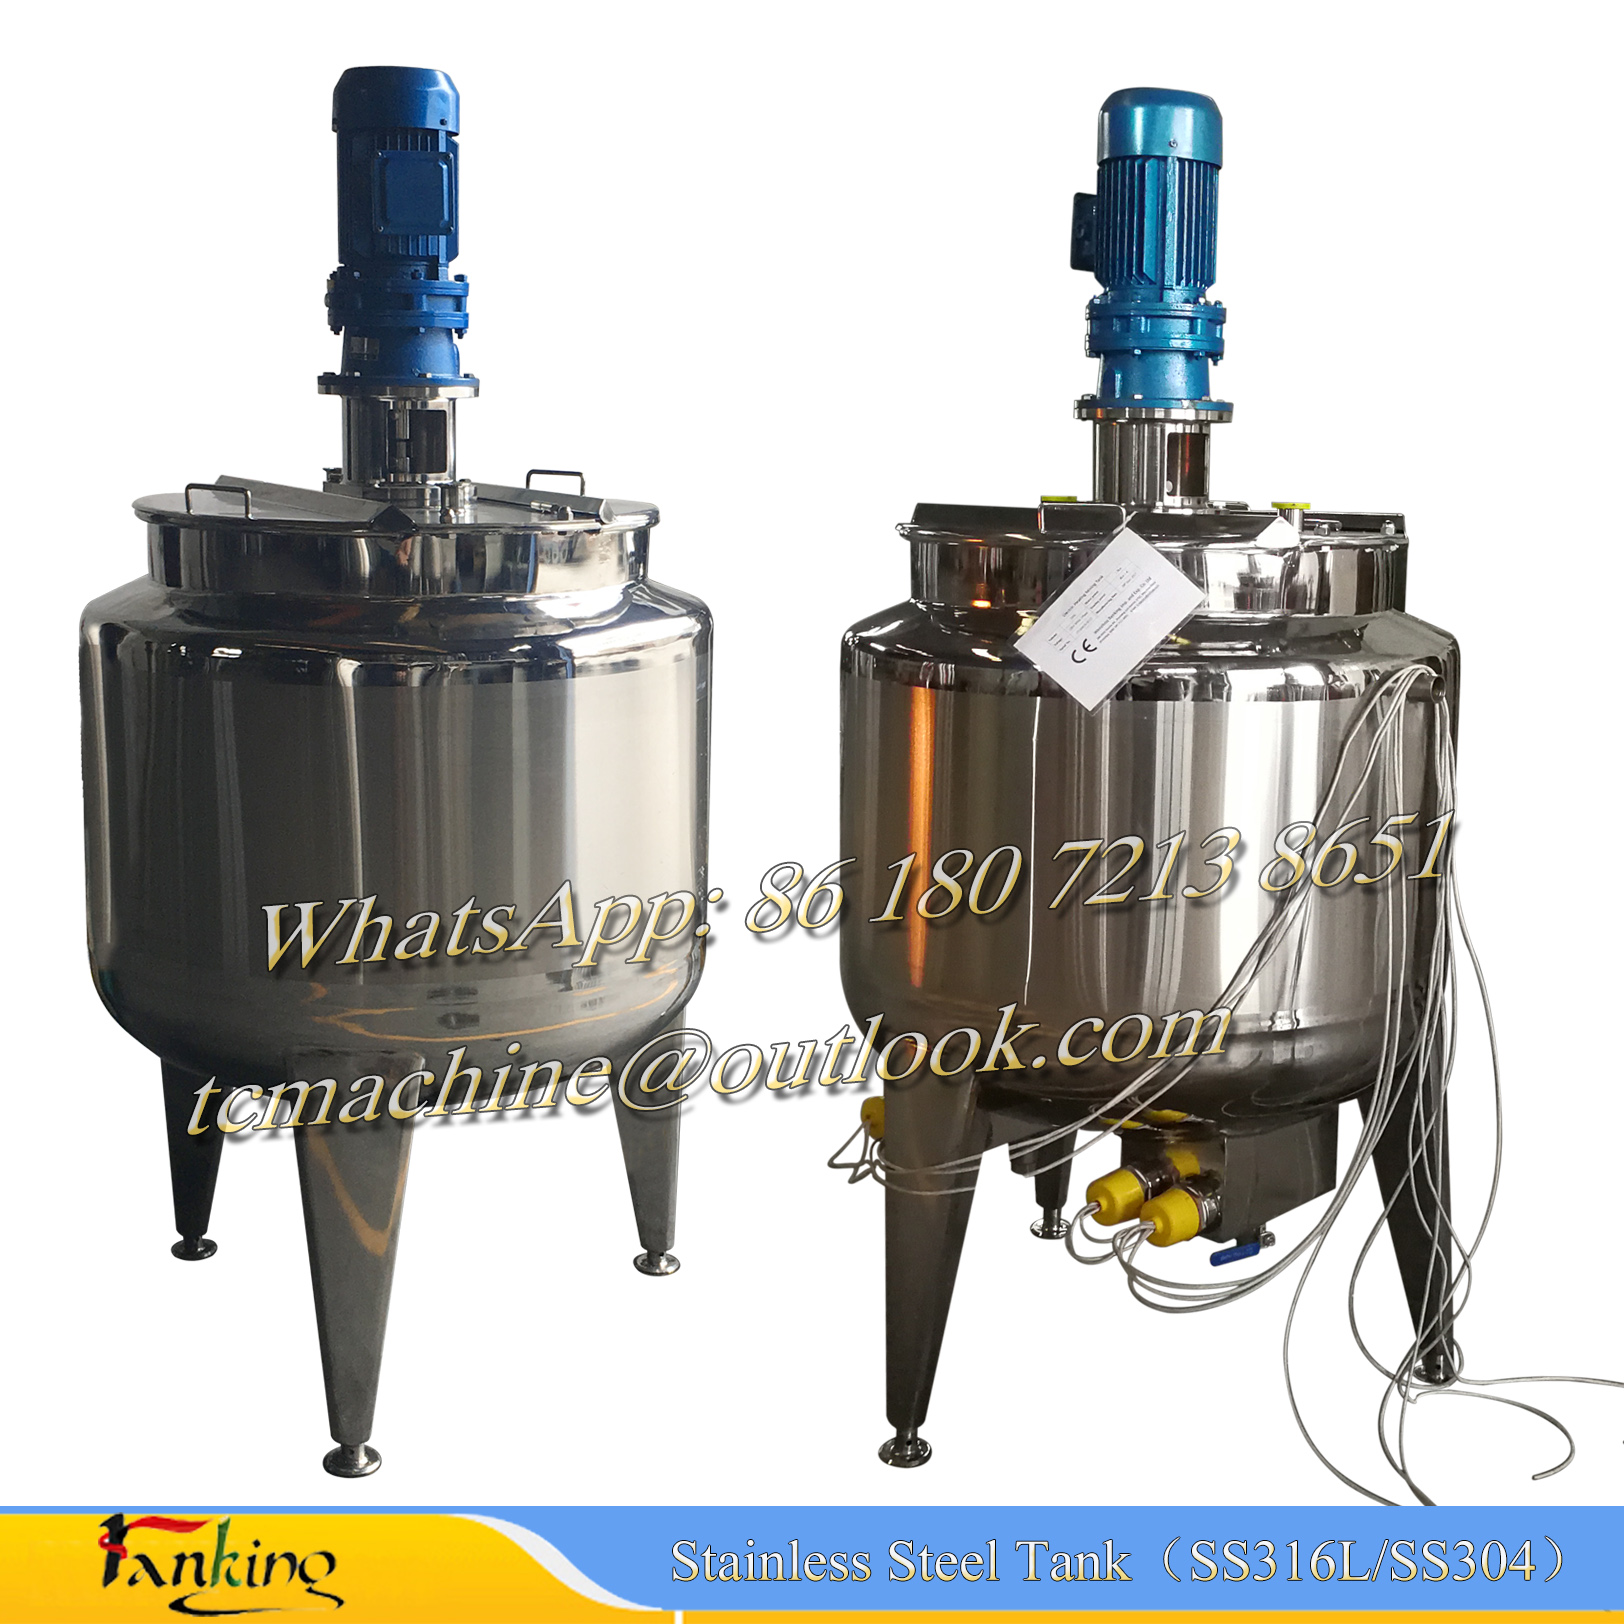 Stainless steel vessel for mixing / emulsifying / homogenizing / cooling / heating jacketed tanks